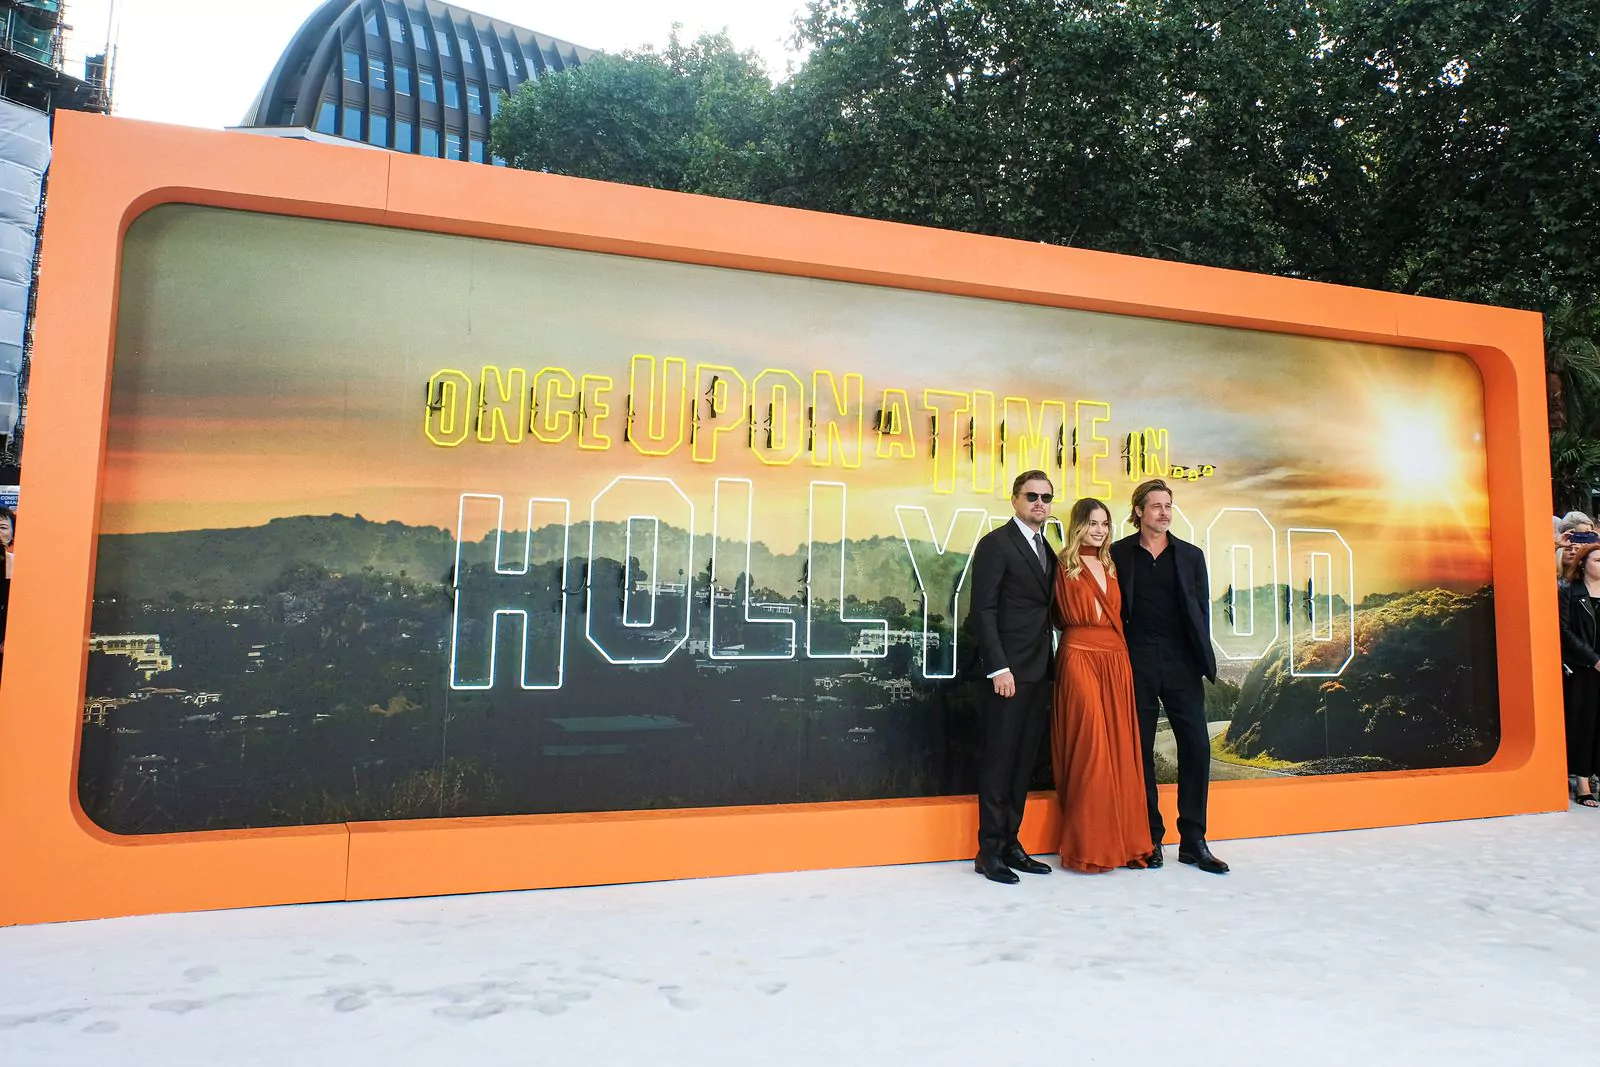 Leonardo DiCaprio, Margot Robbie and Brad Pitt at the premiere of Once Upon a Time in Hollywood in London, July 30, 2019.